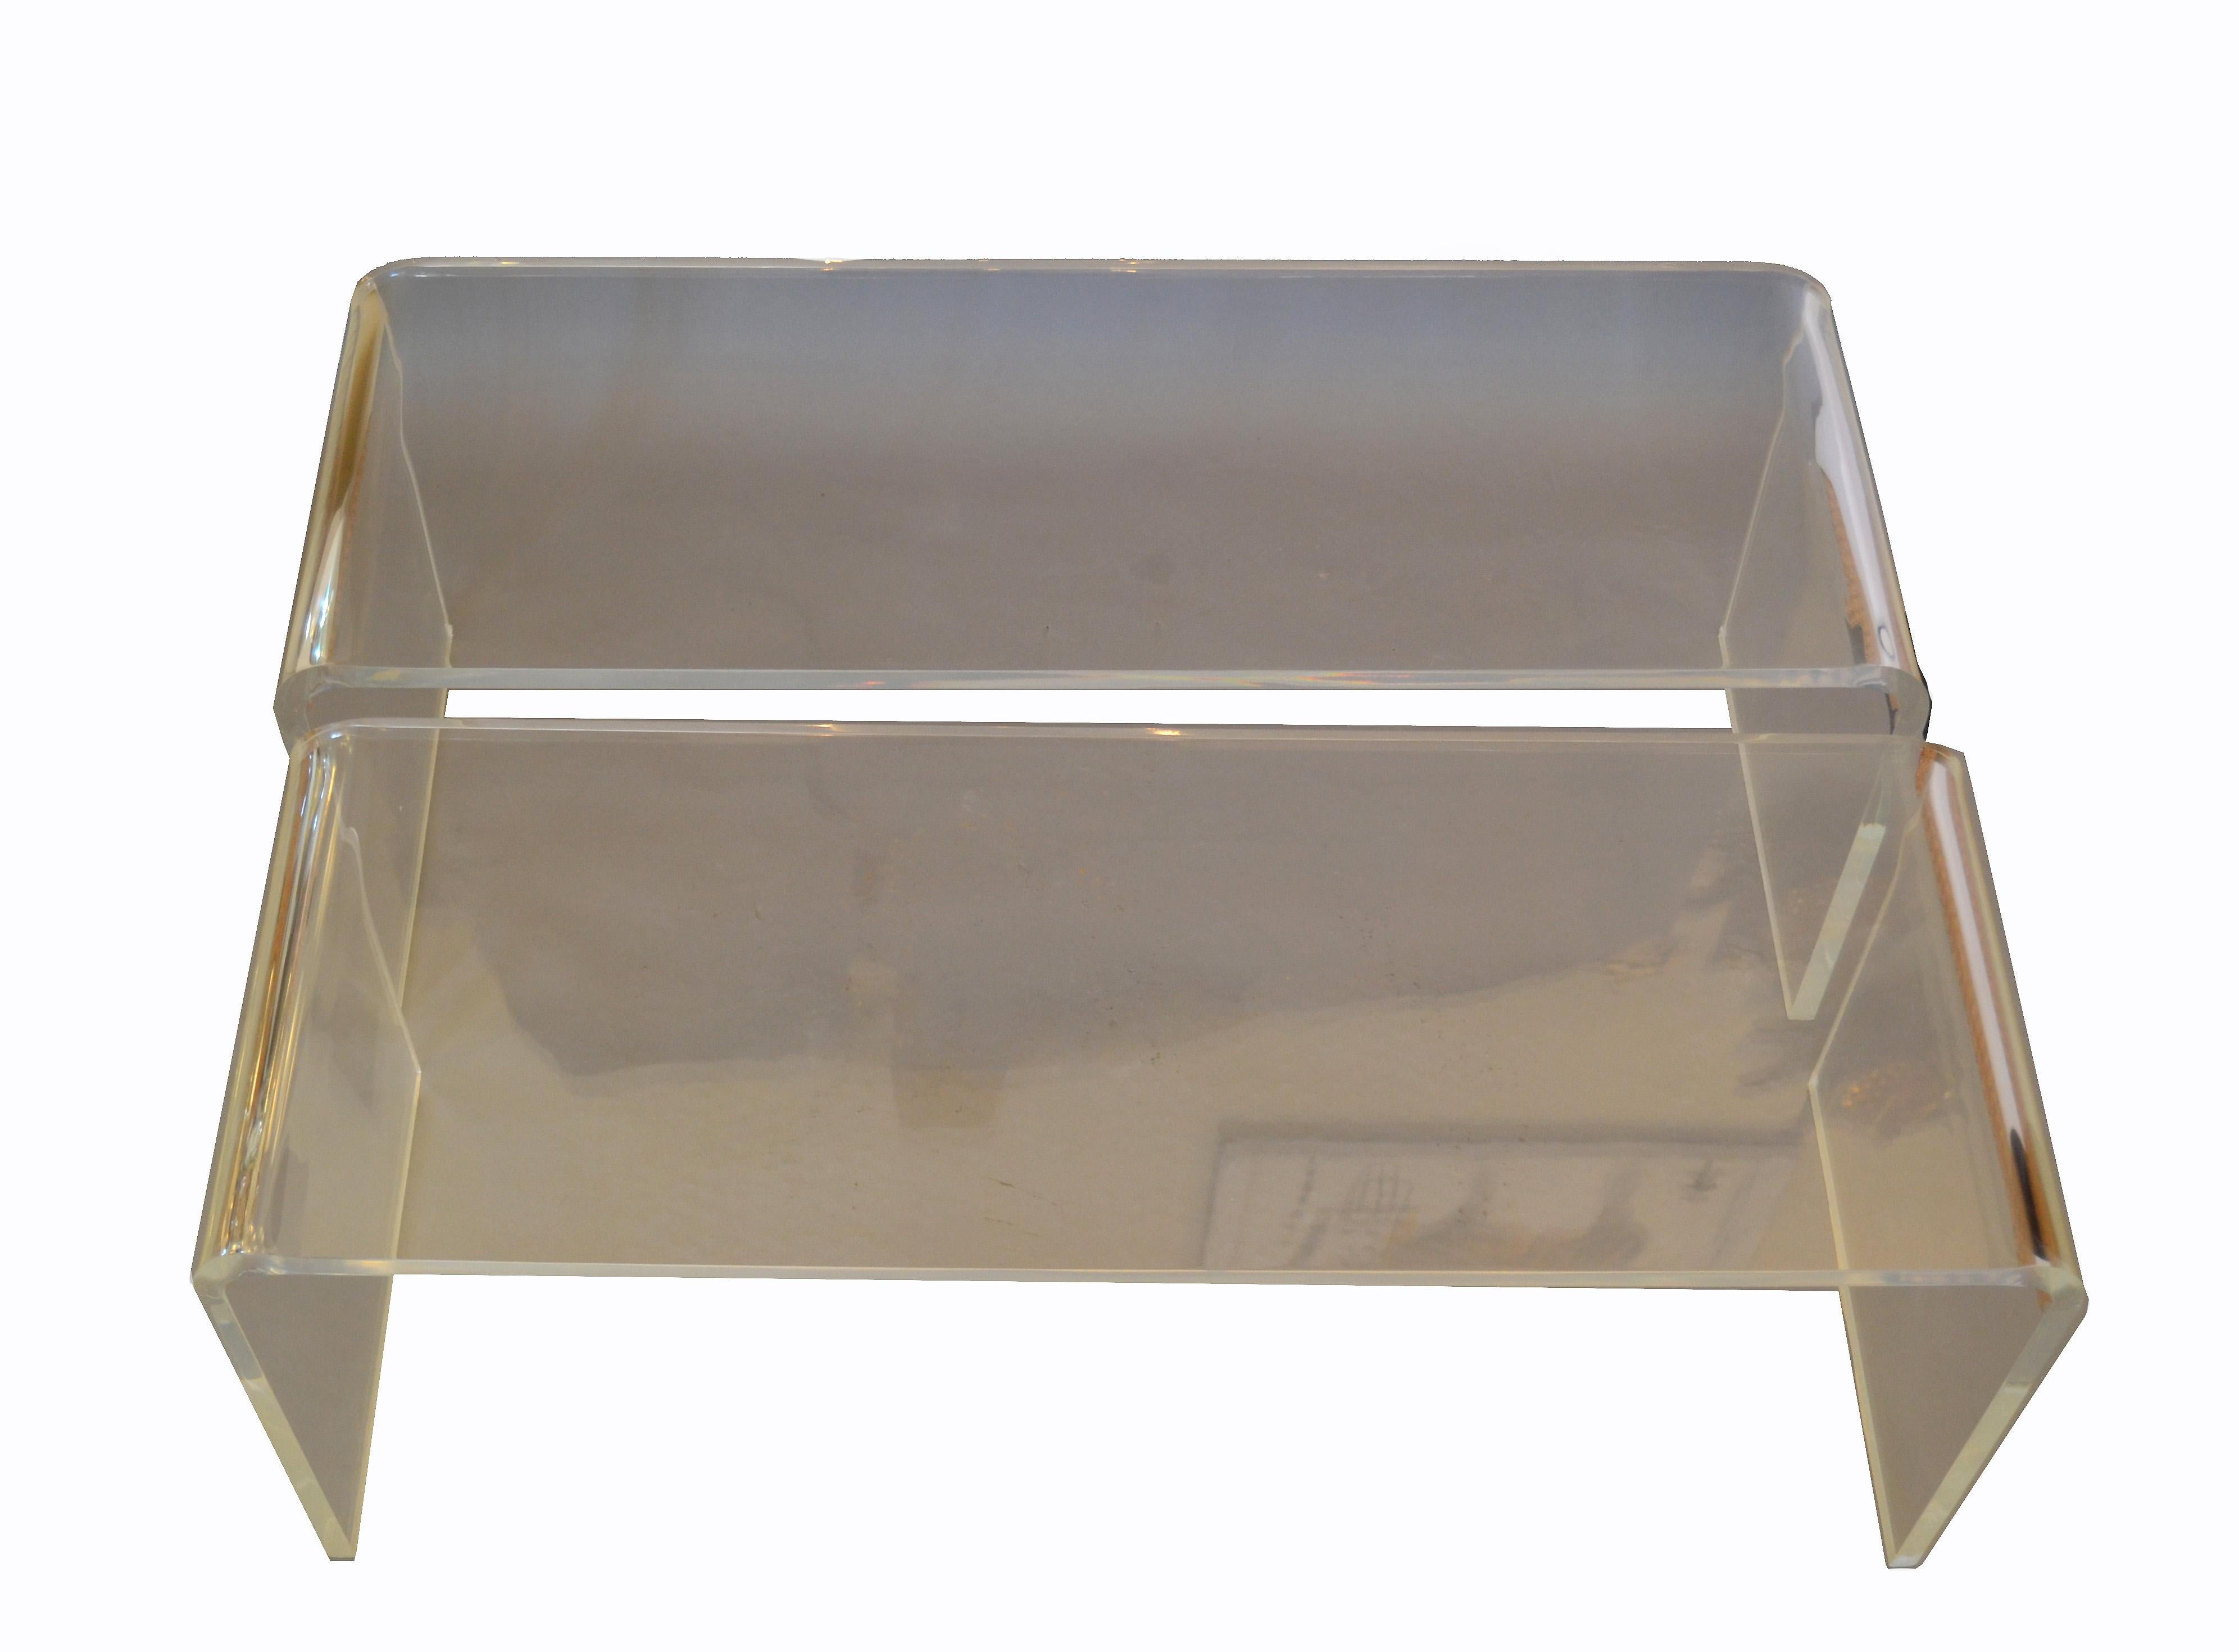 Clear Mid-Century Modern Lucite bench, sofa table or side table.
The Lucite is 3/4 inches thick.
Only ONE is available.